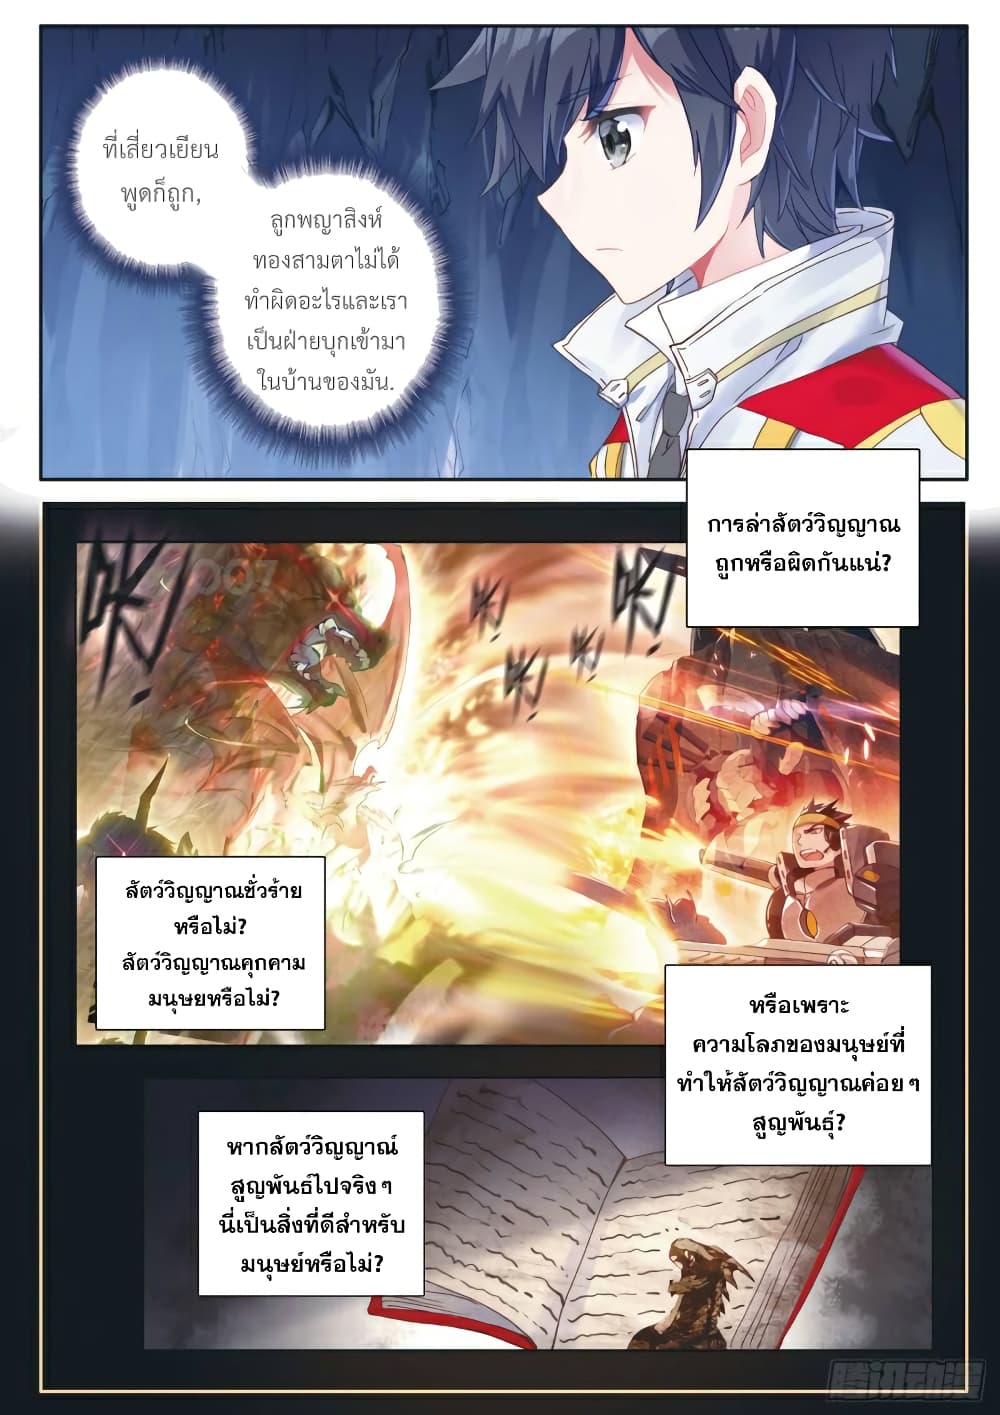 Douluo Dalu 3: The Legend of the Dragon King 161-ตัวเลือก